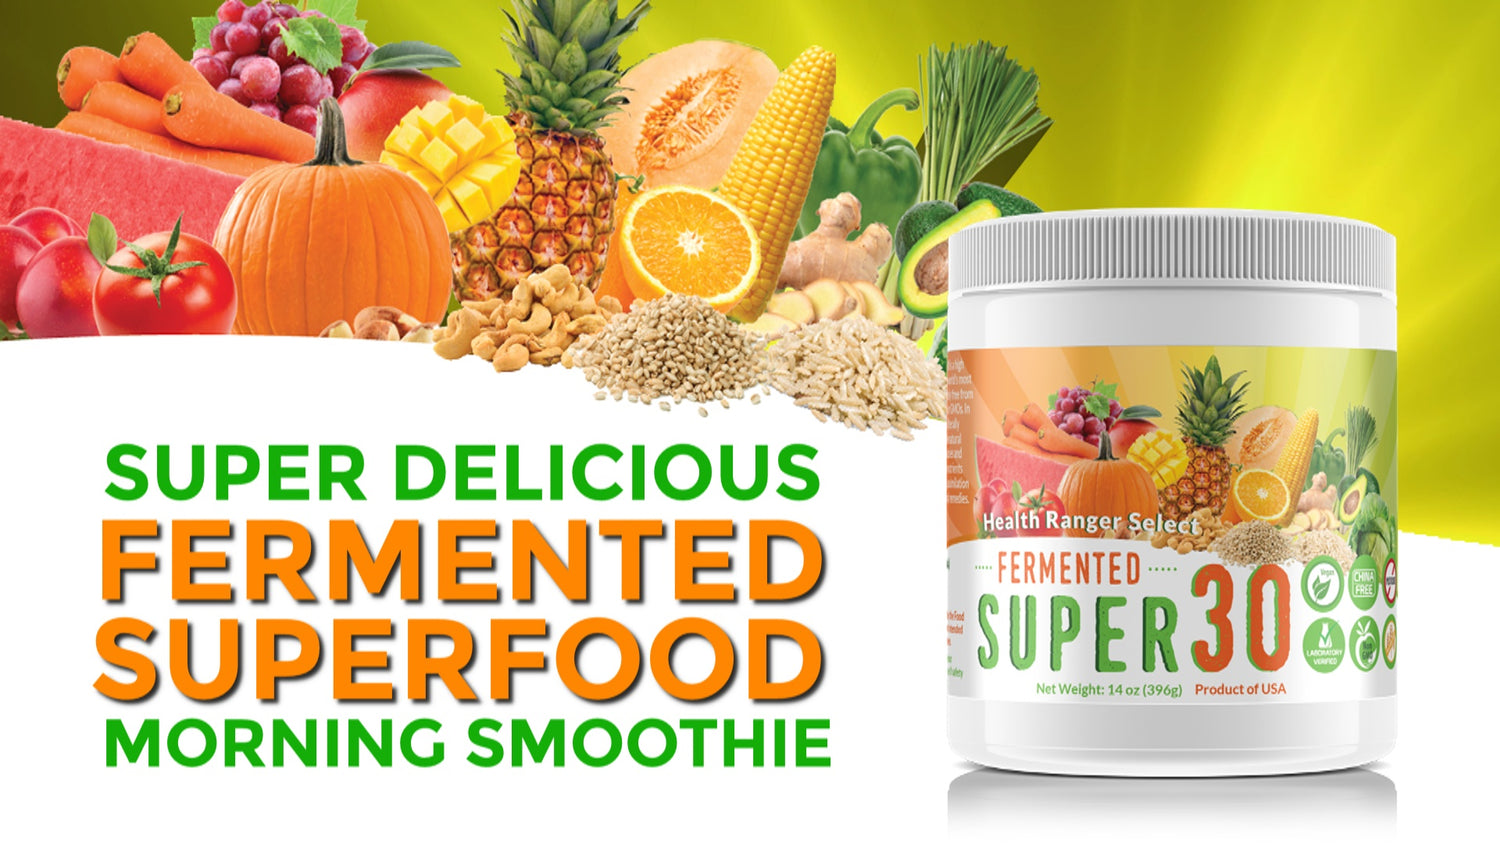 Super Delicious Fermented Superfood Morning Smoothie